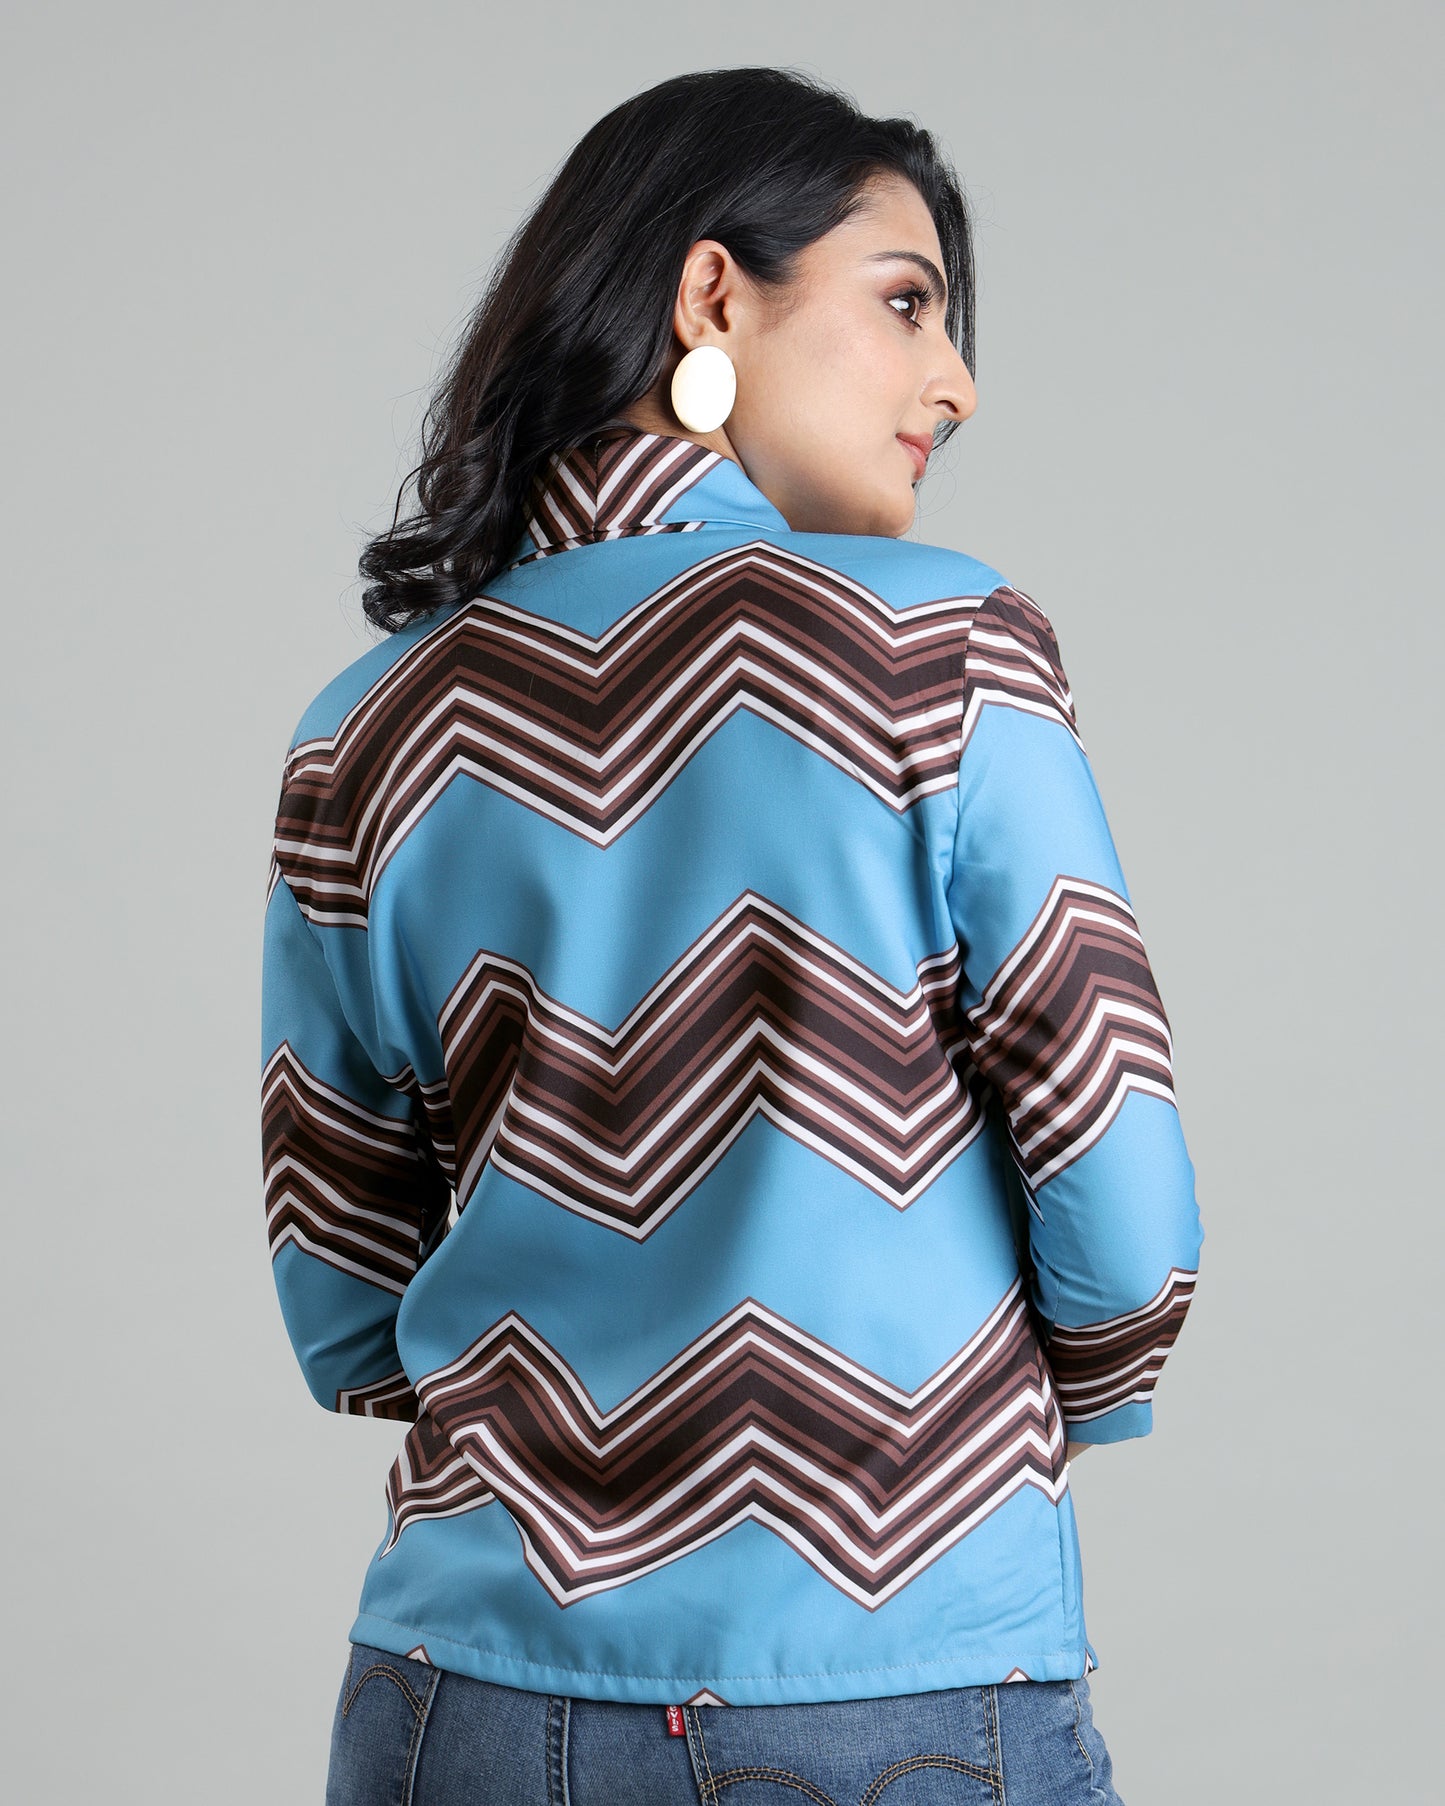 Zigzag Zoom: Women's Jacket For Take Charge Look